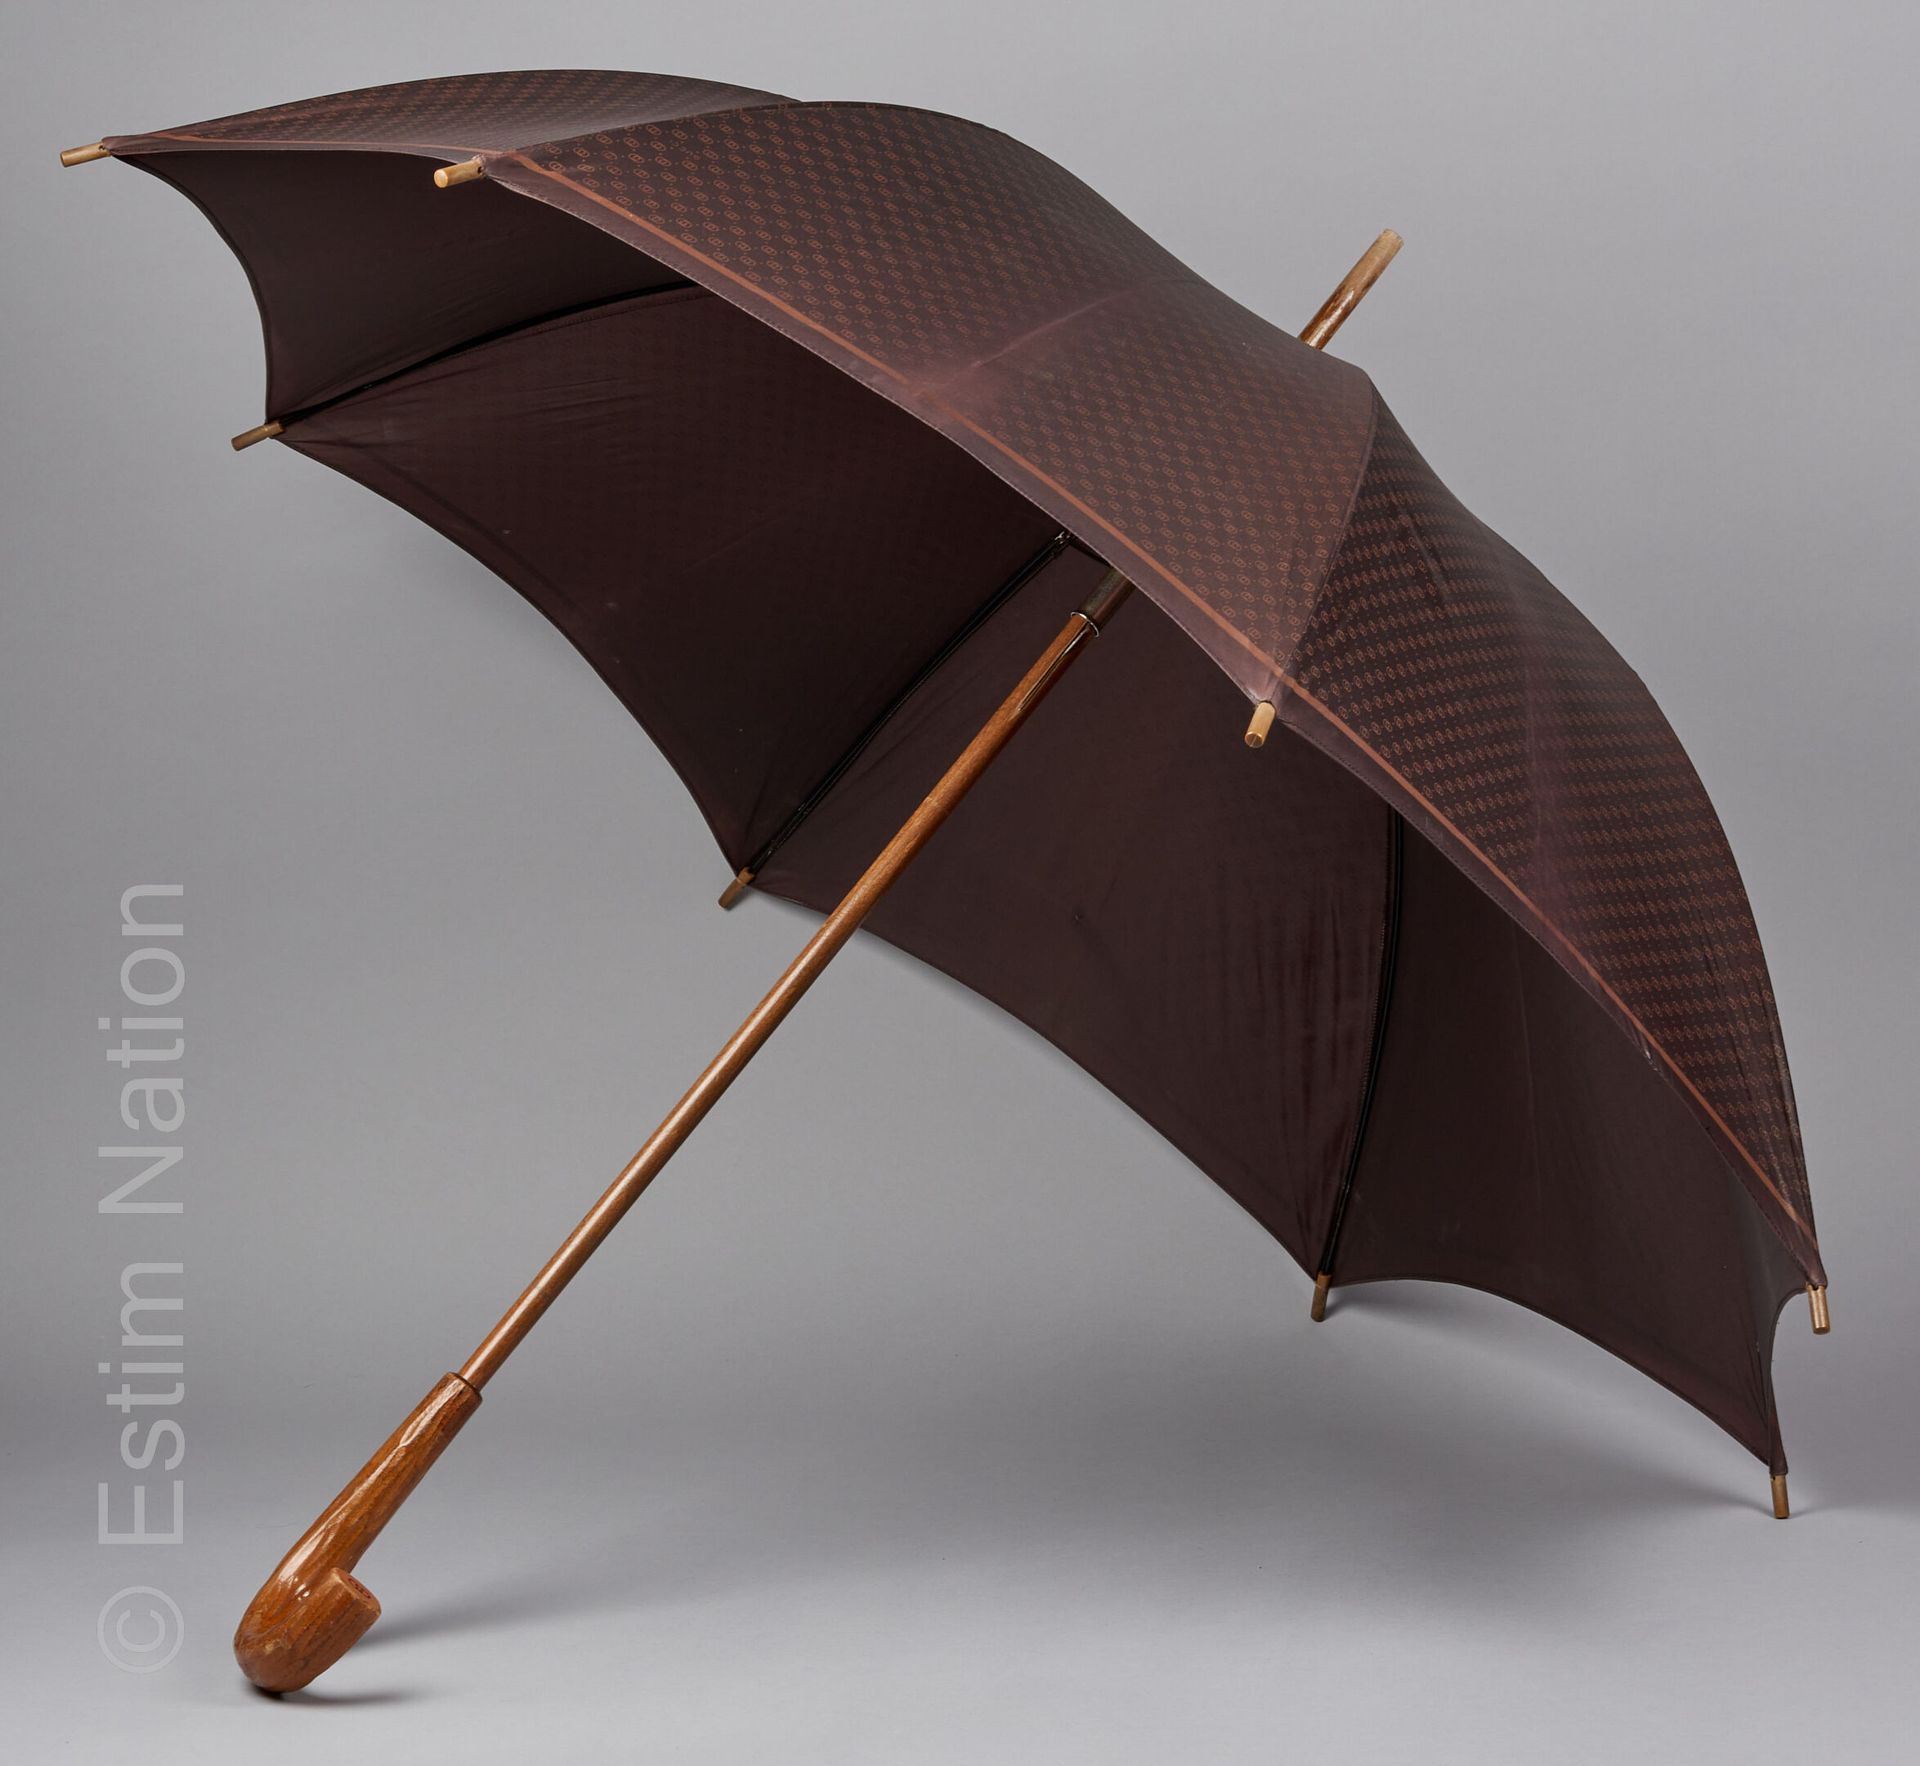 GUCCI VINTAGE CIRCA 1970 
Nylon umbrella printed with the logo on a brown backgr&hellip;